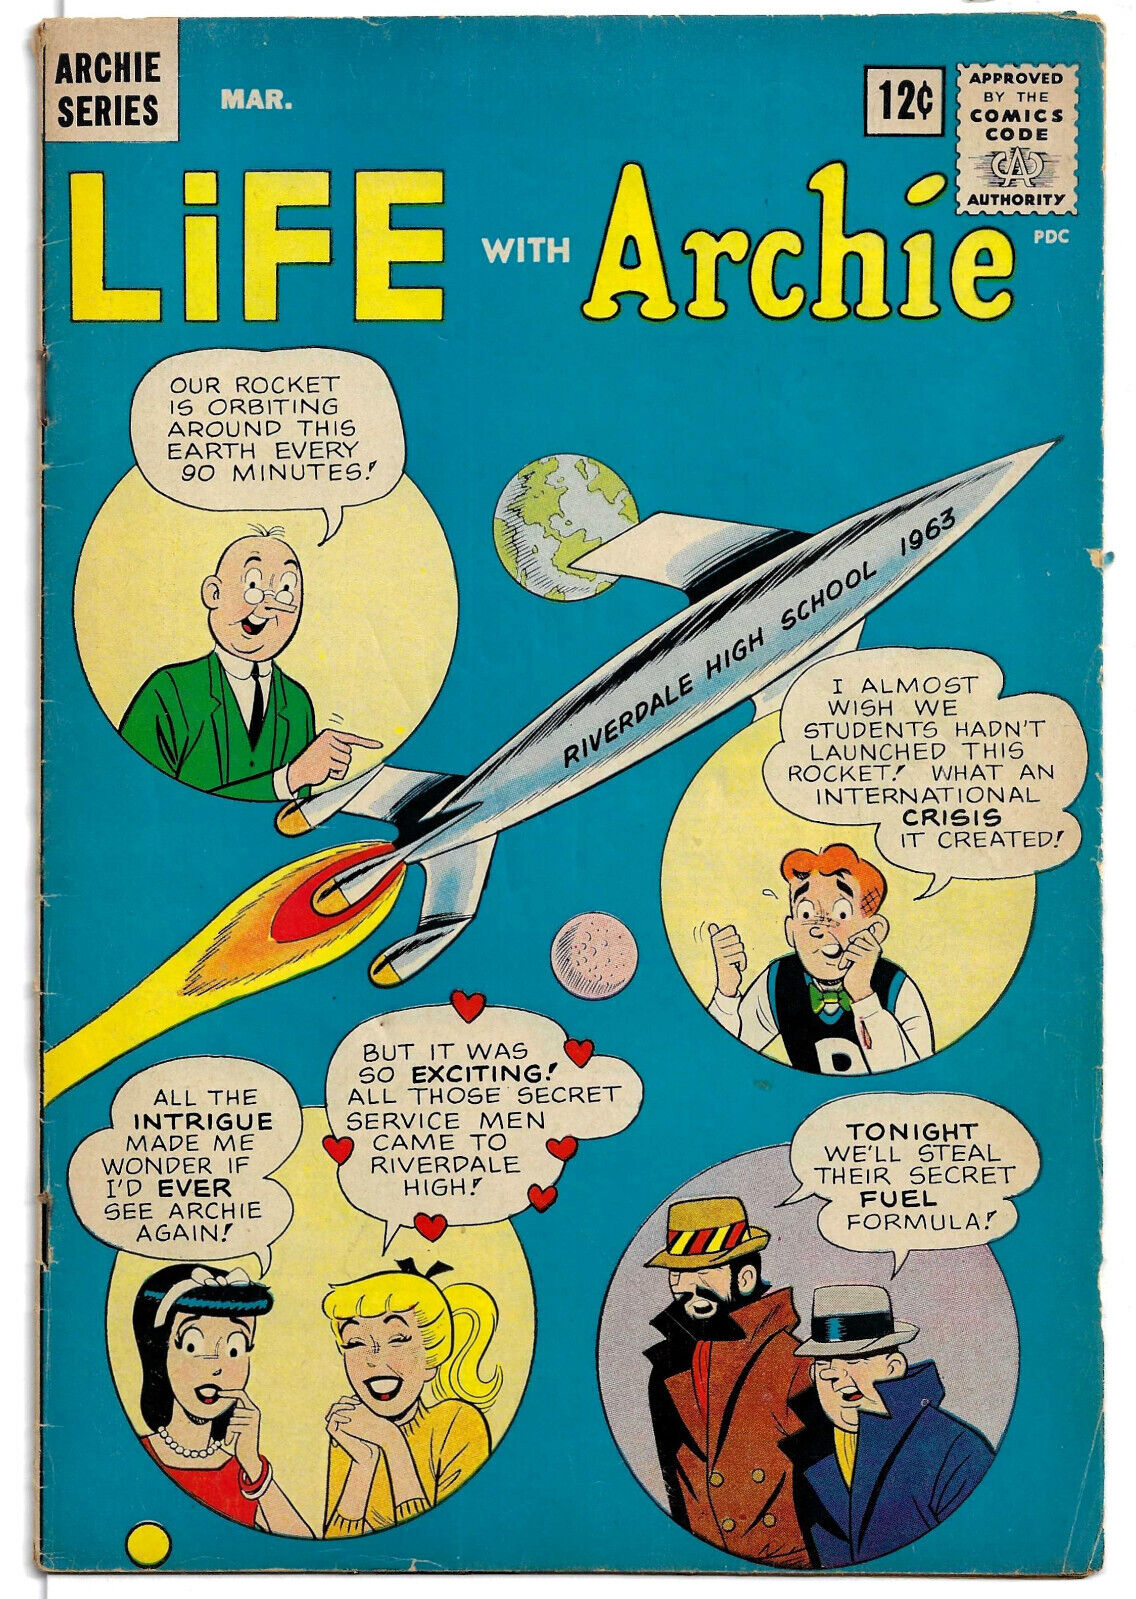 Life with Archie #19 (Archie Series) March 1963  Condition – VERY GOOD-